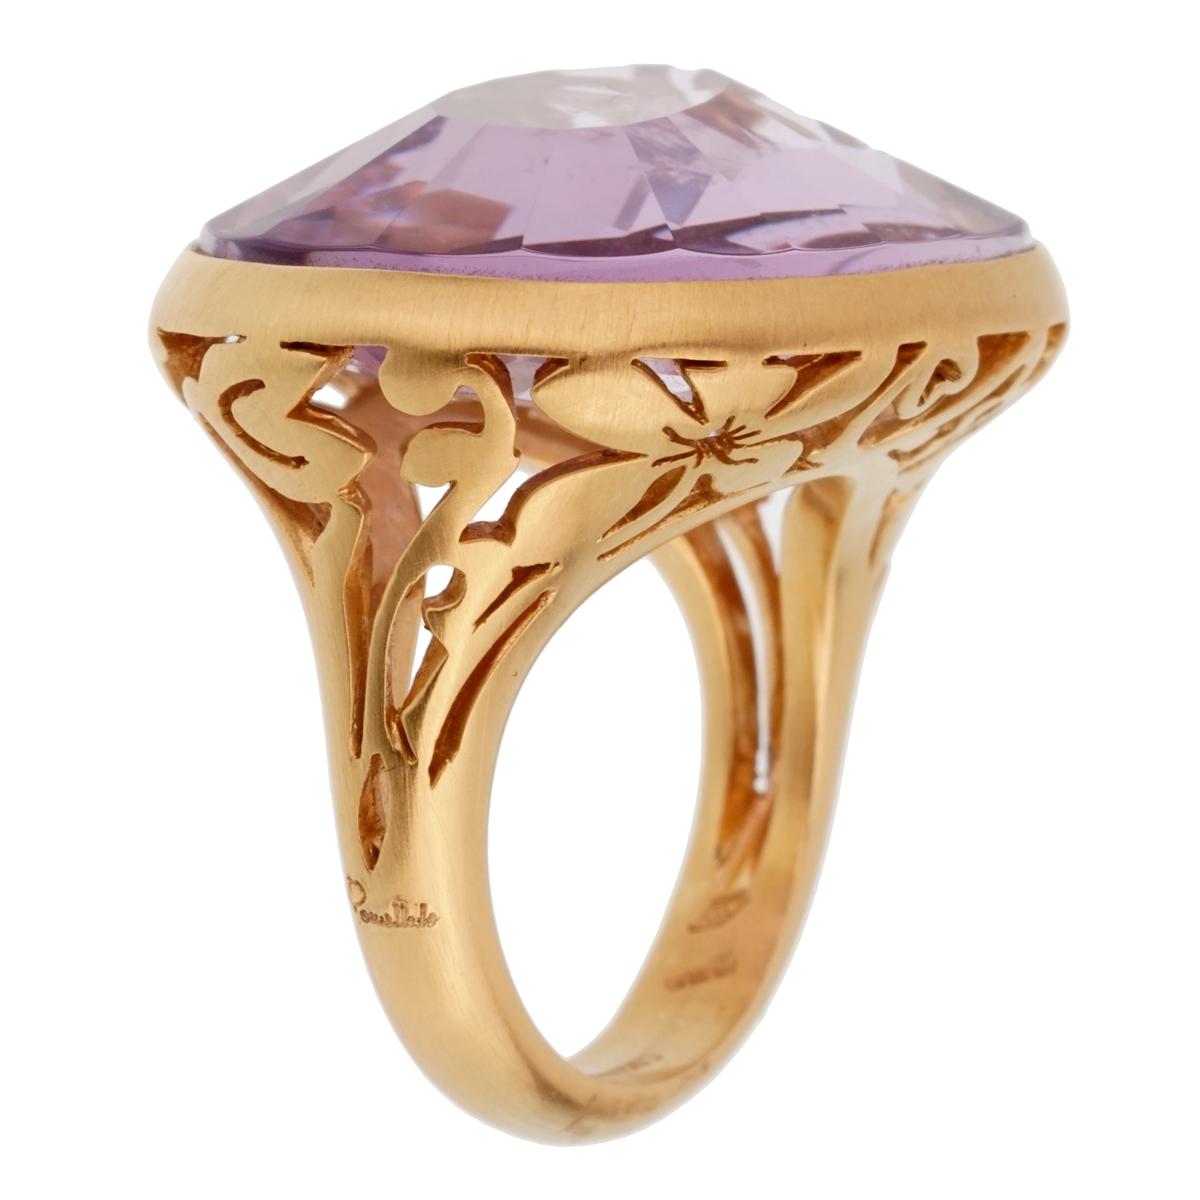 A chic brand new Pomellato cocktail ring showcasing a 10.19ct Amethyst set in 18k rose gold. The ring measures a size 6.25 and can be resized

Pomellato Retail: $5500
Sku: 2310